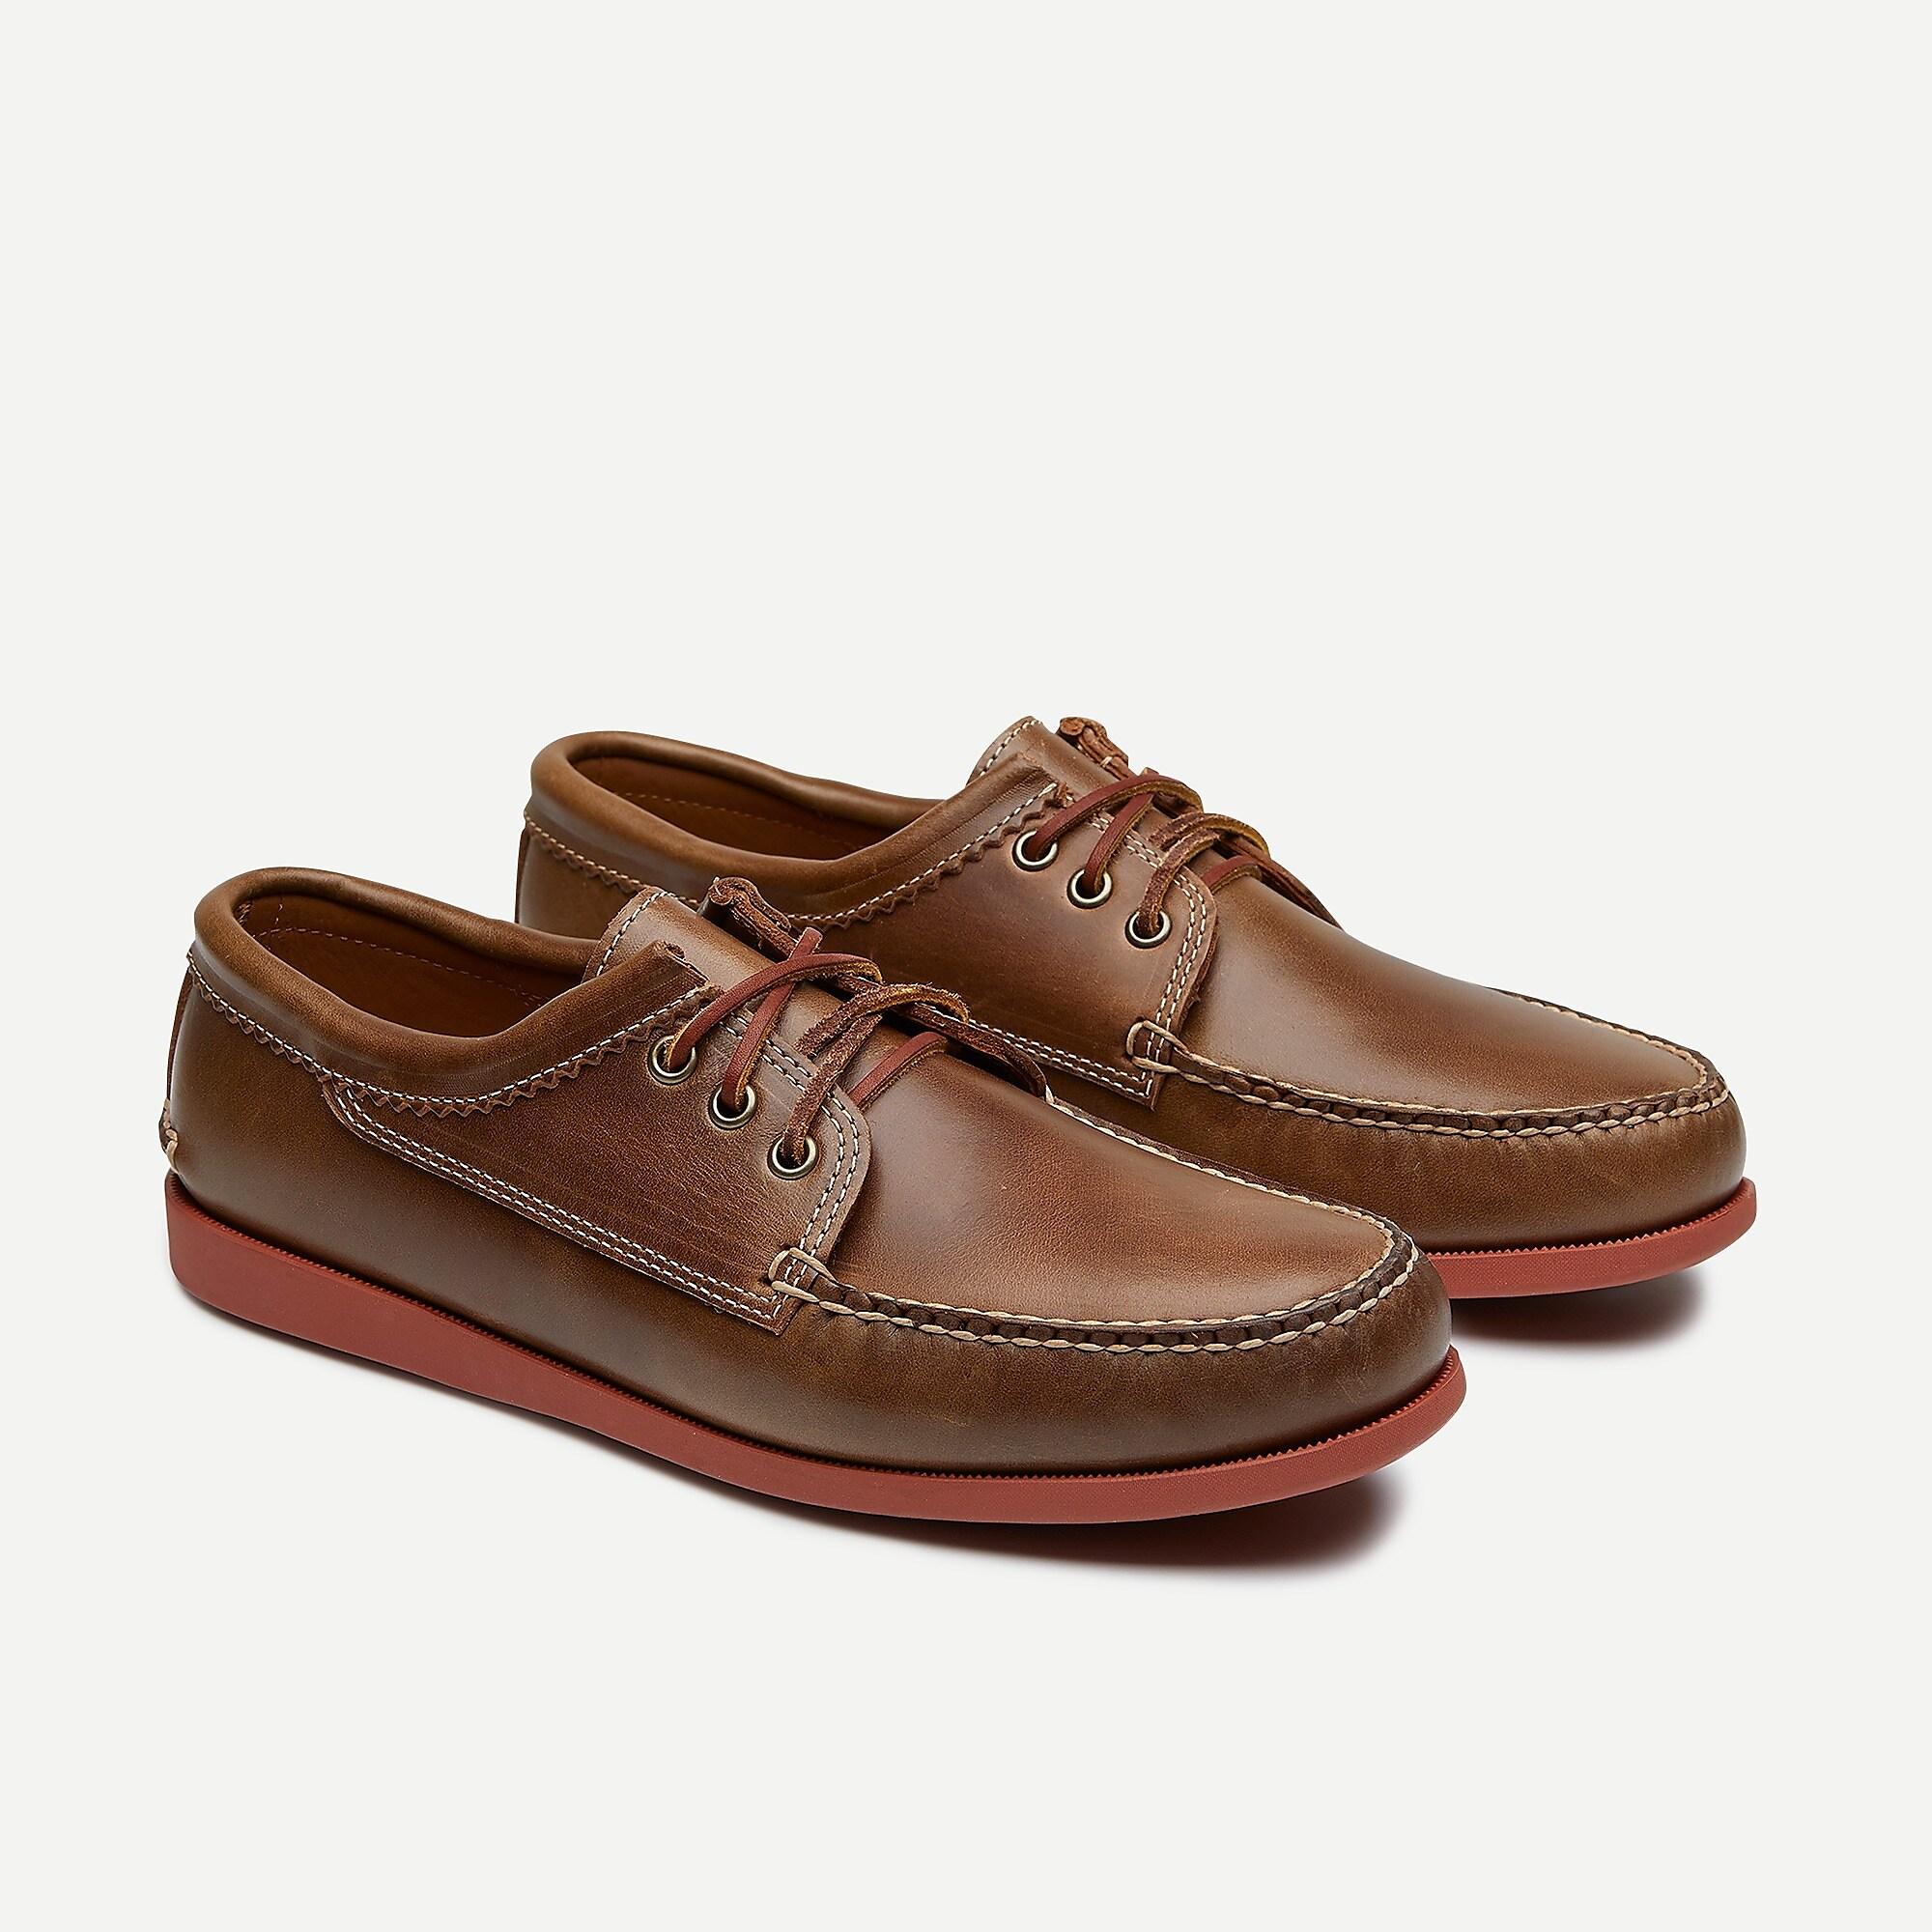 Quoddy Blucher Shoes in Natural for Men - Lyst